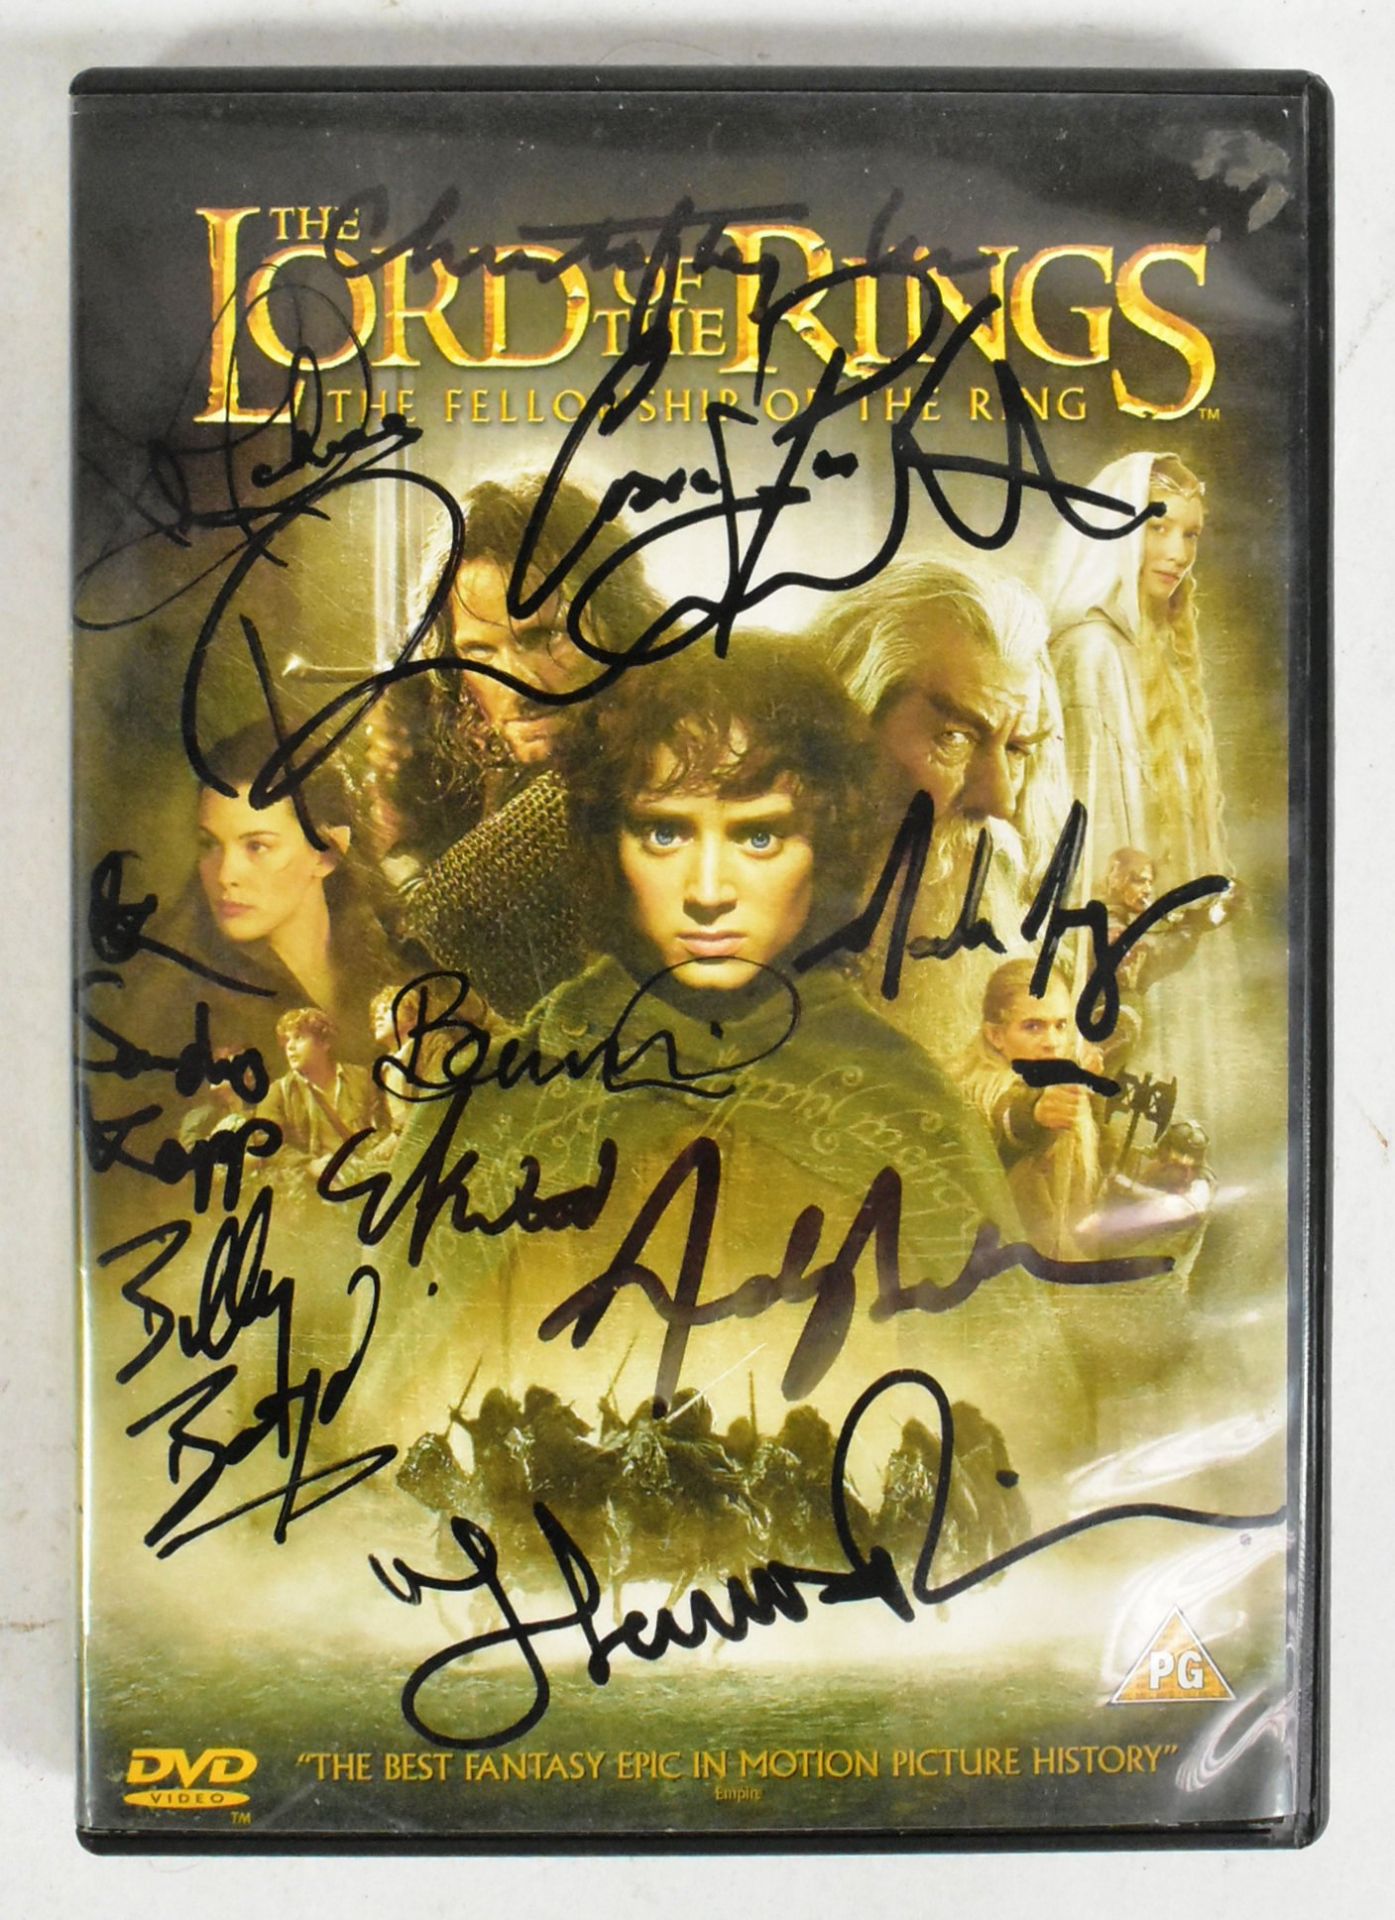 LORD OF THE RINGS - THE FELLOWSHIP OF THE RING - SIGNED DVD